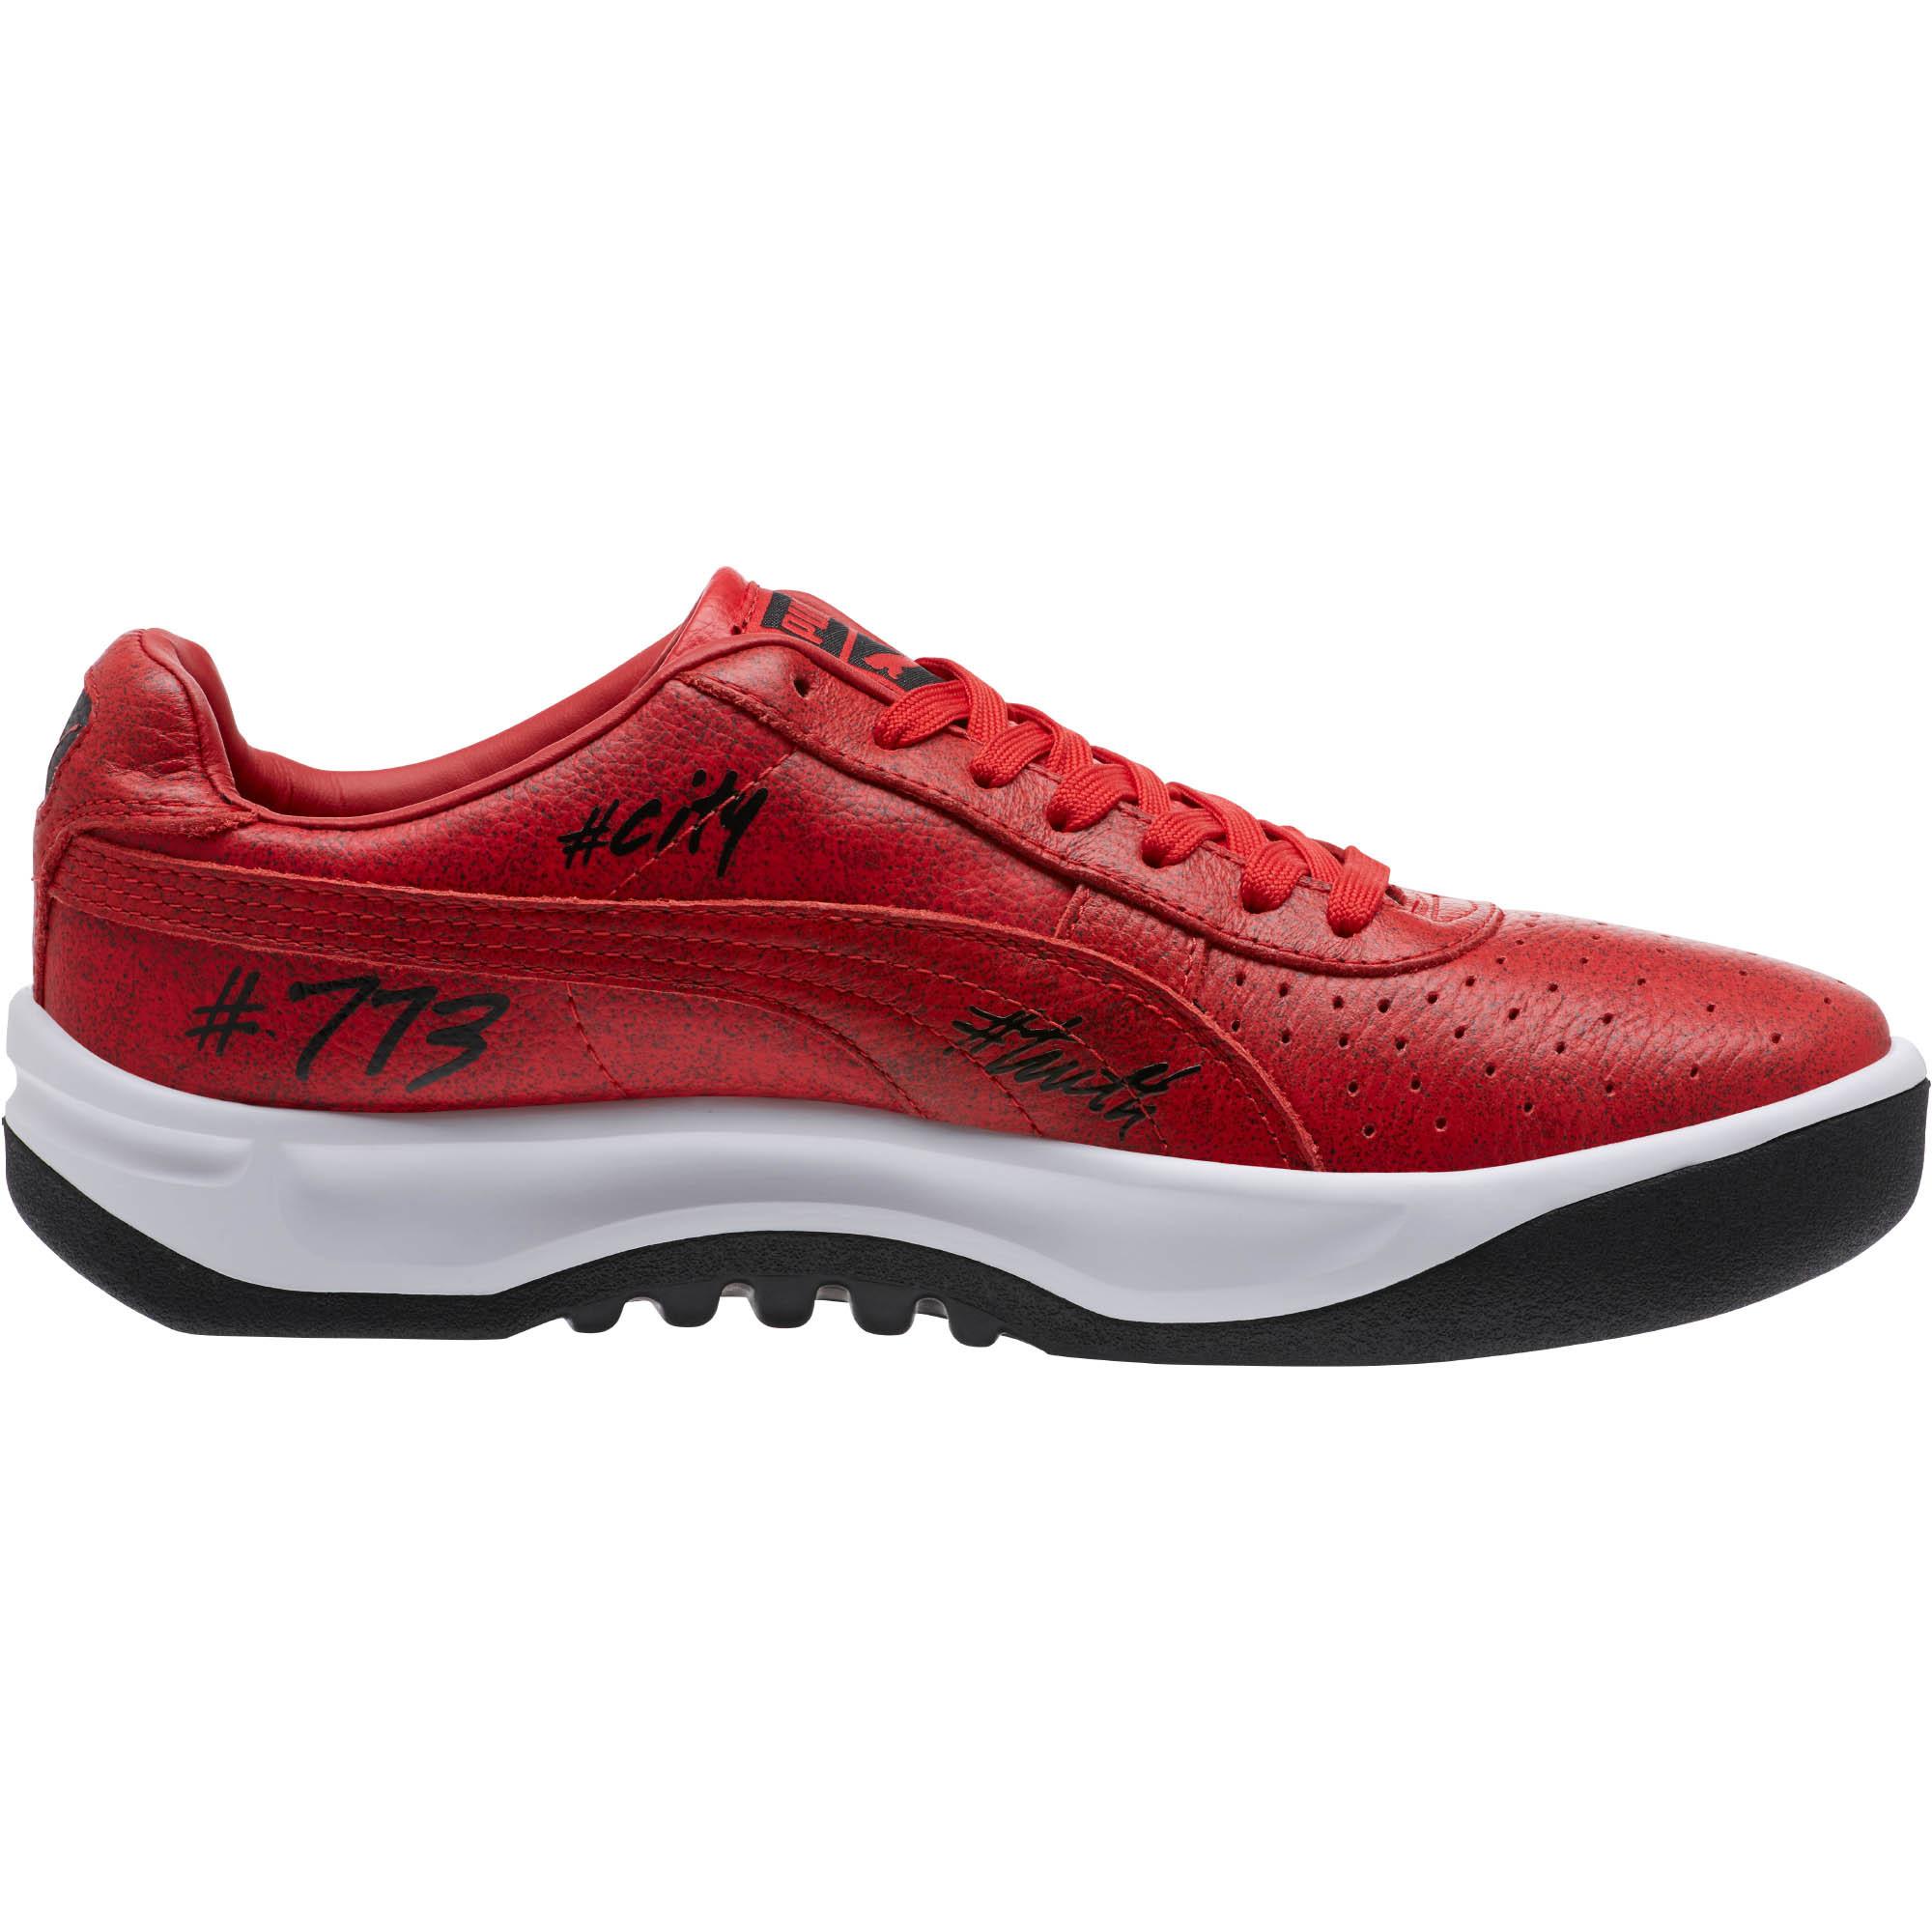 PUMA Gv Special Chicago Sneakers in 01 (Red) for Men - Lyst